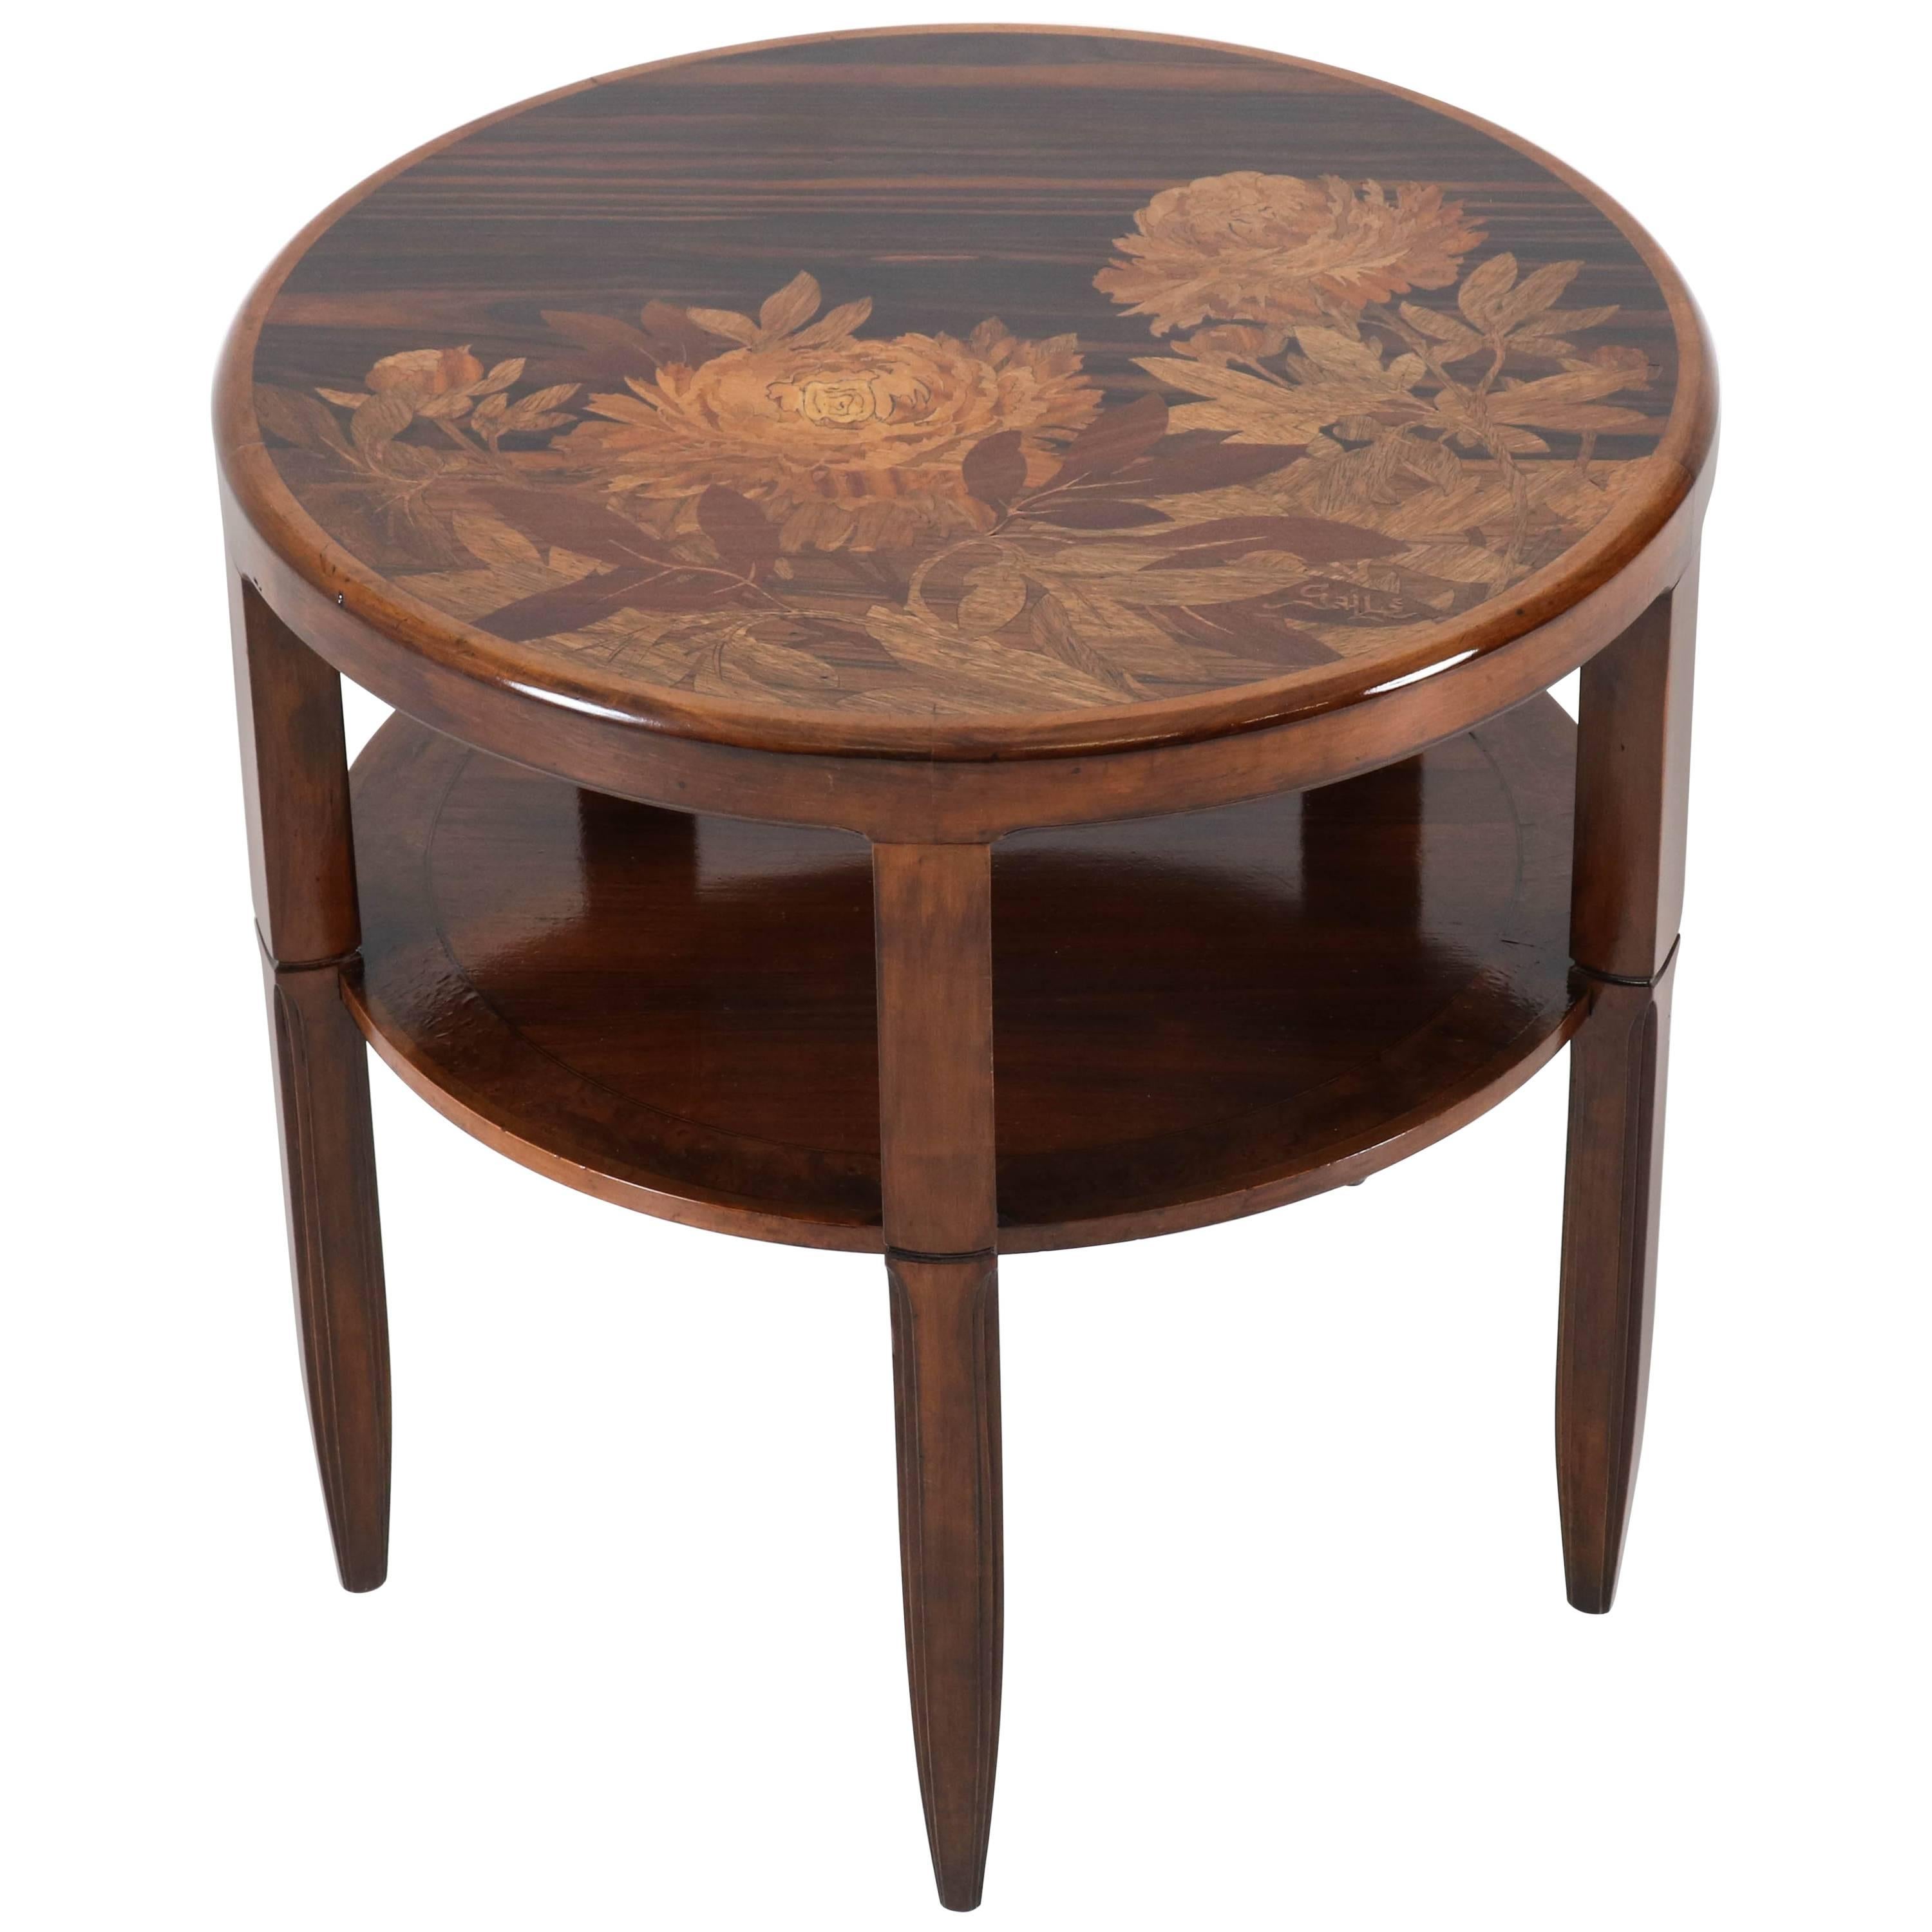 Walnut and Macassar French Art Nouveau Marquetry Table by Emile Gallé, 1900s